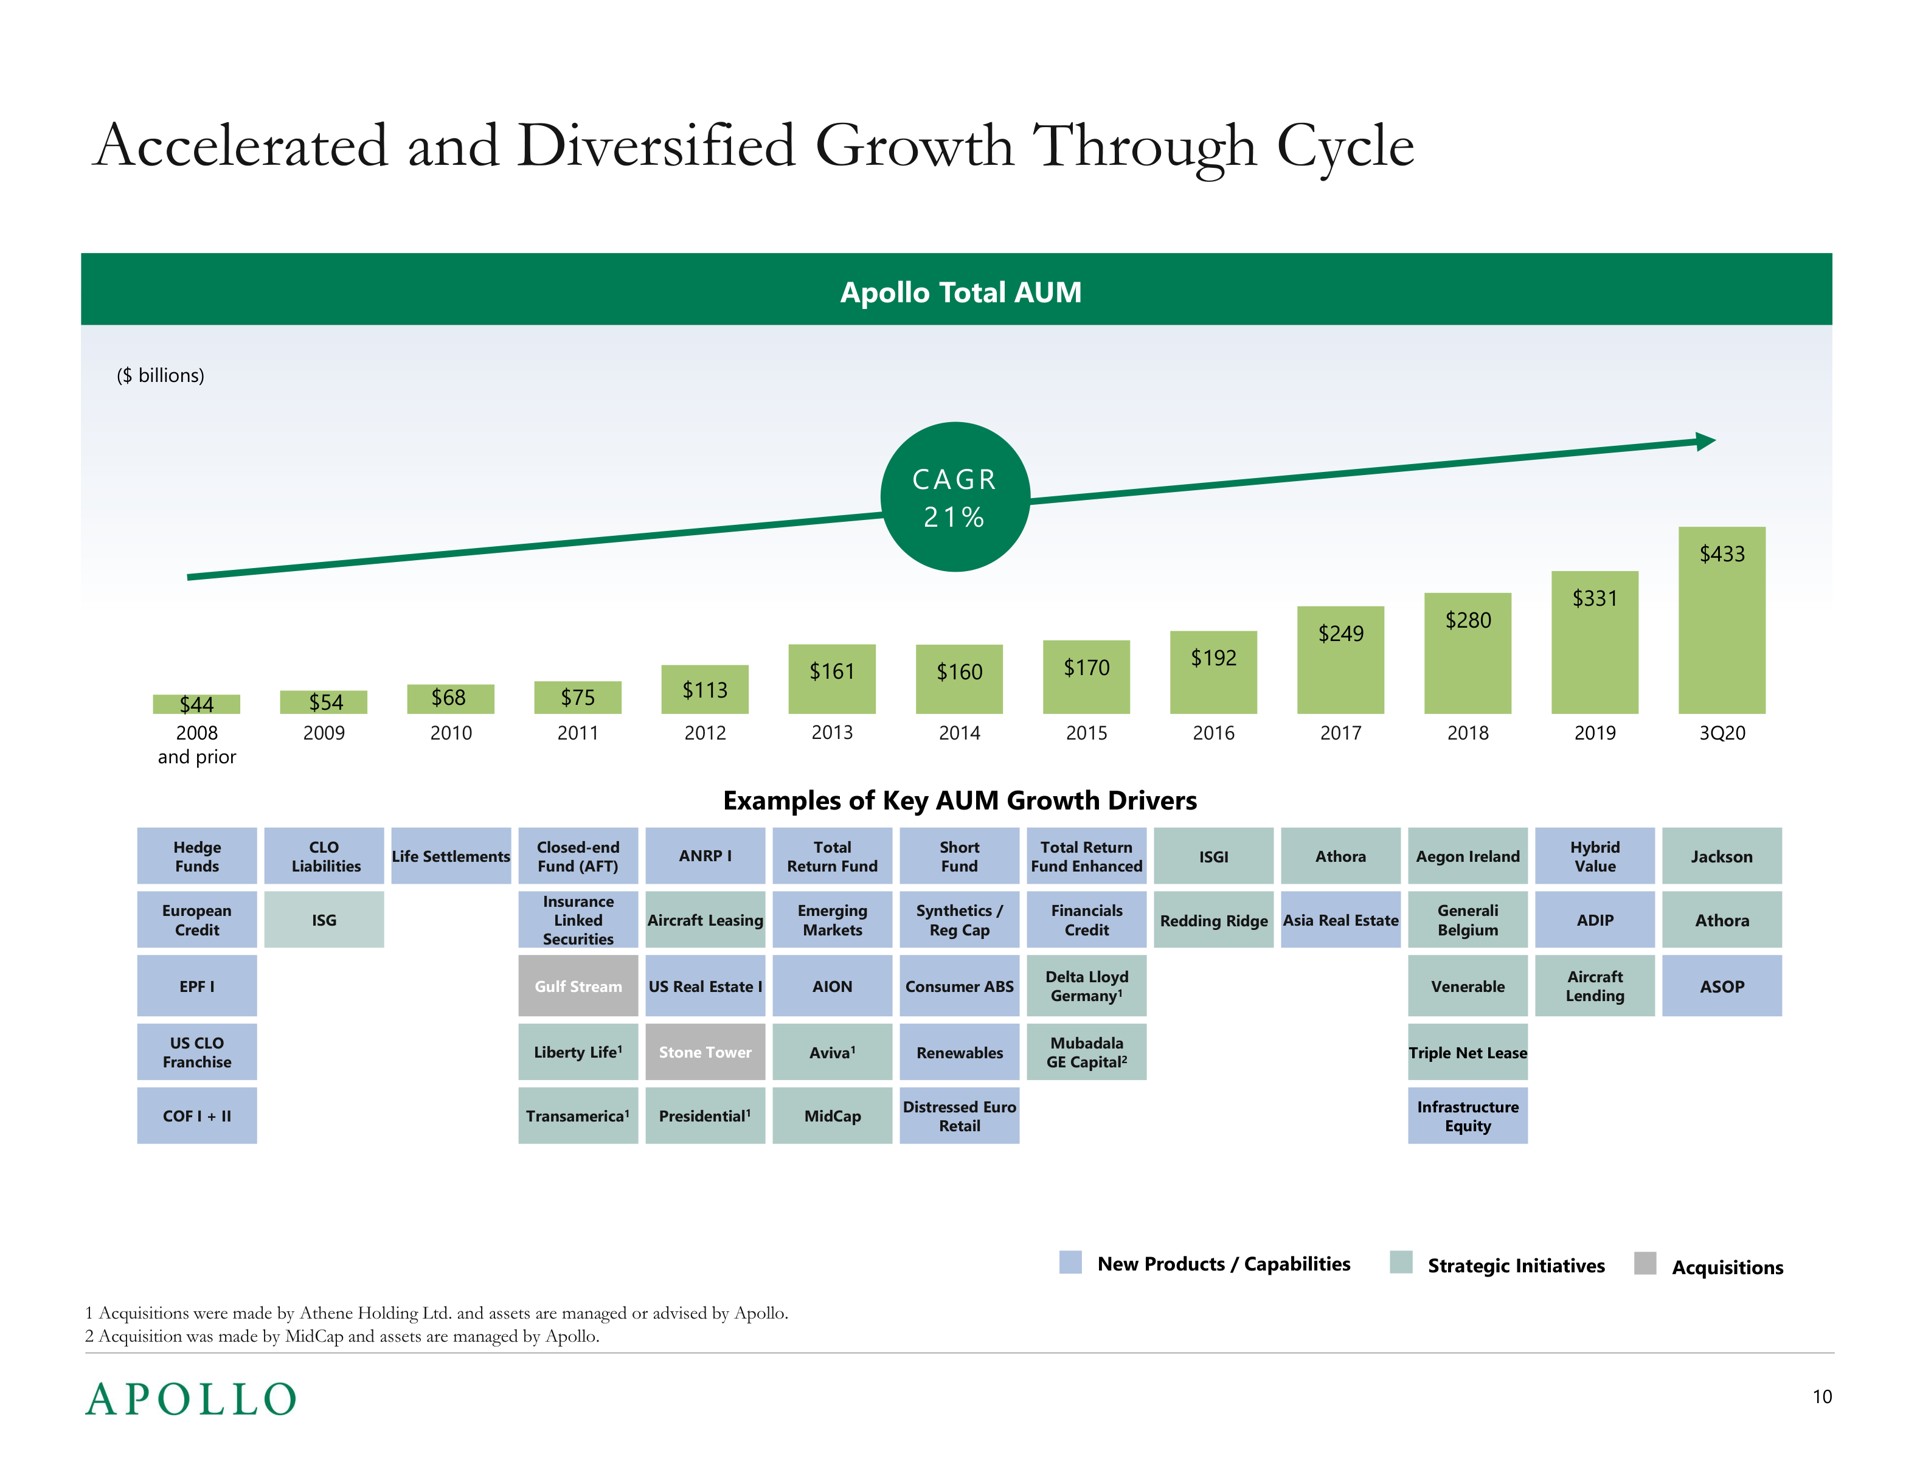 accelerated and diversified growth through cycle nace | Apollo Global Management